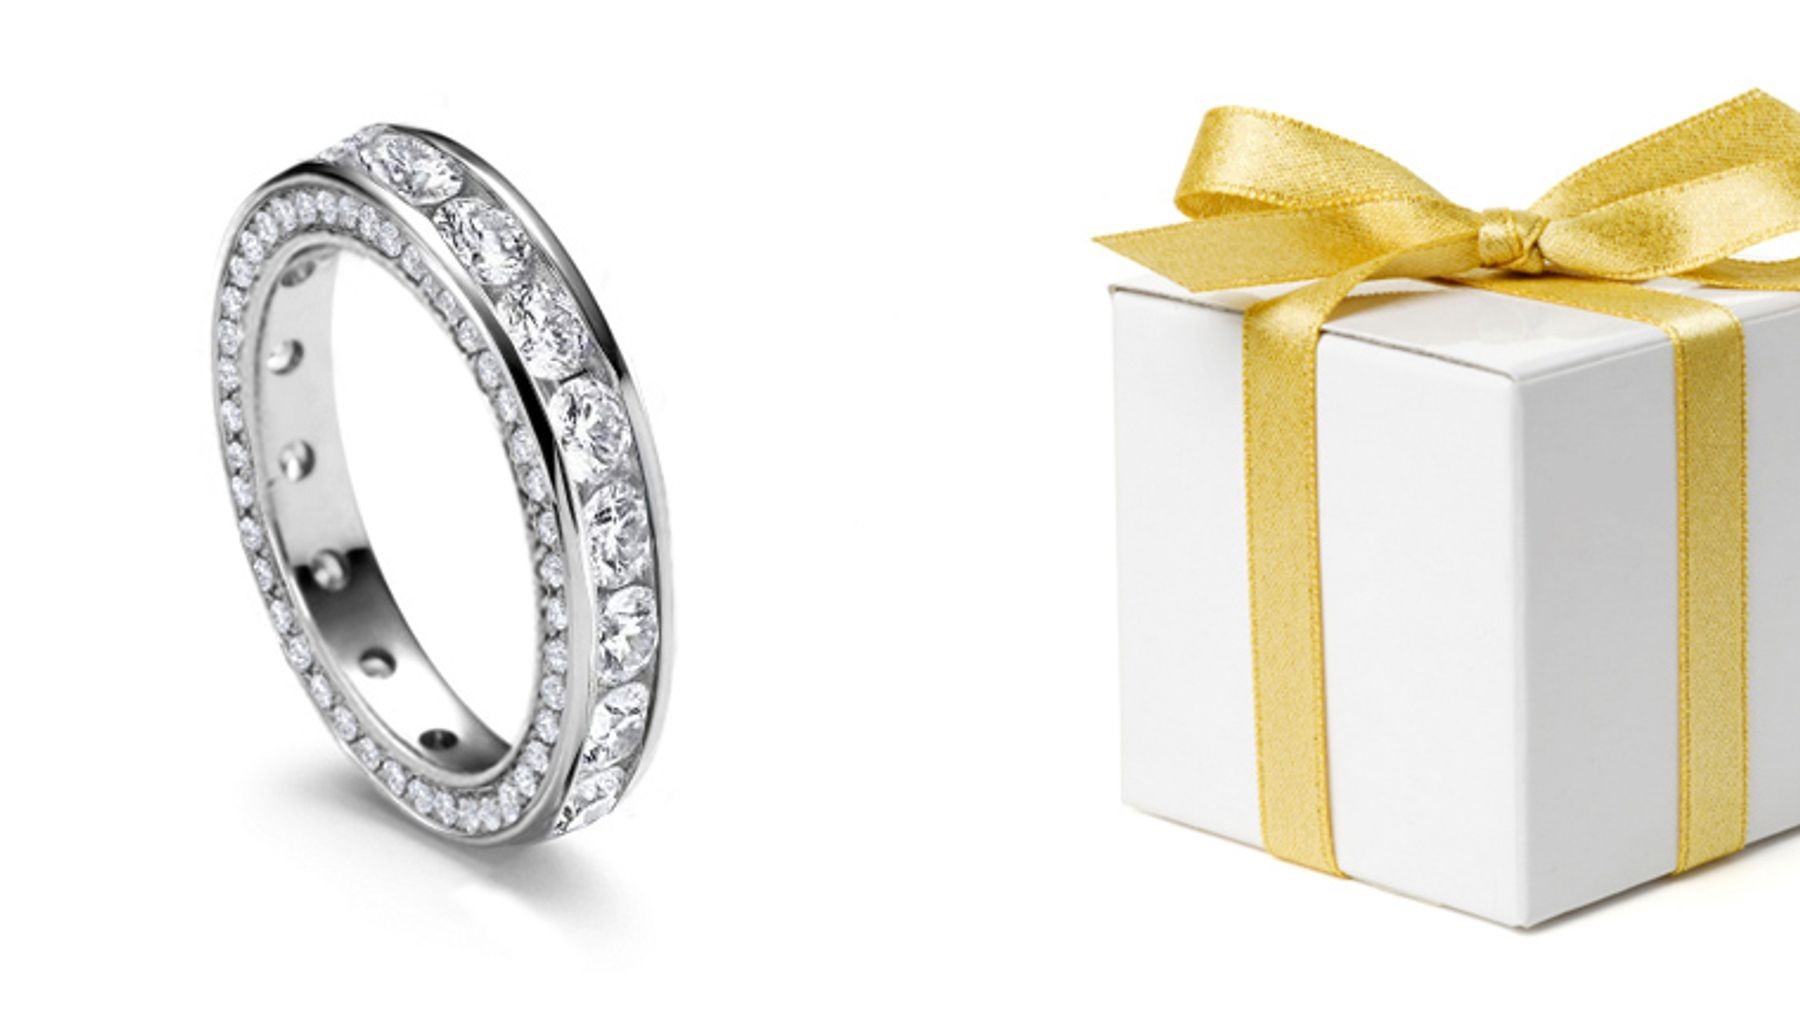 Twinking Sparkling Halos: View Diamond Wedding Ring Dressed With Small Diamonds on Both Sides of Platinum or Gold Celebration Ring